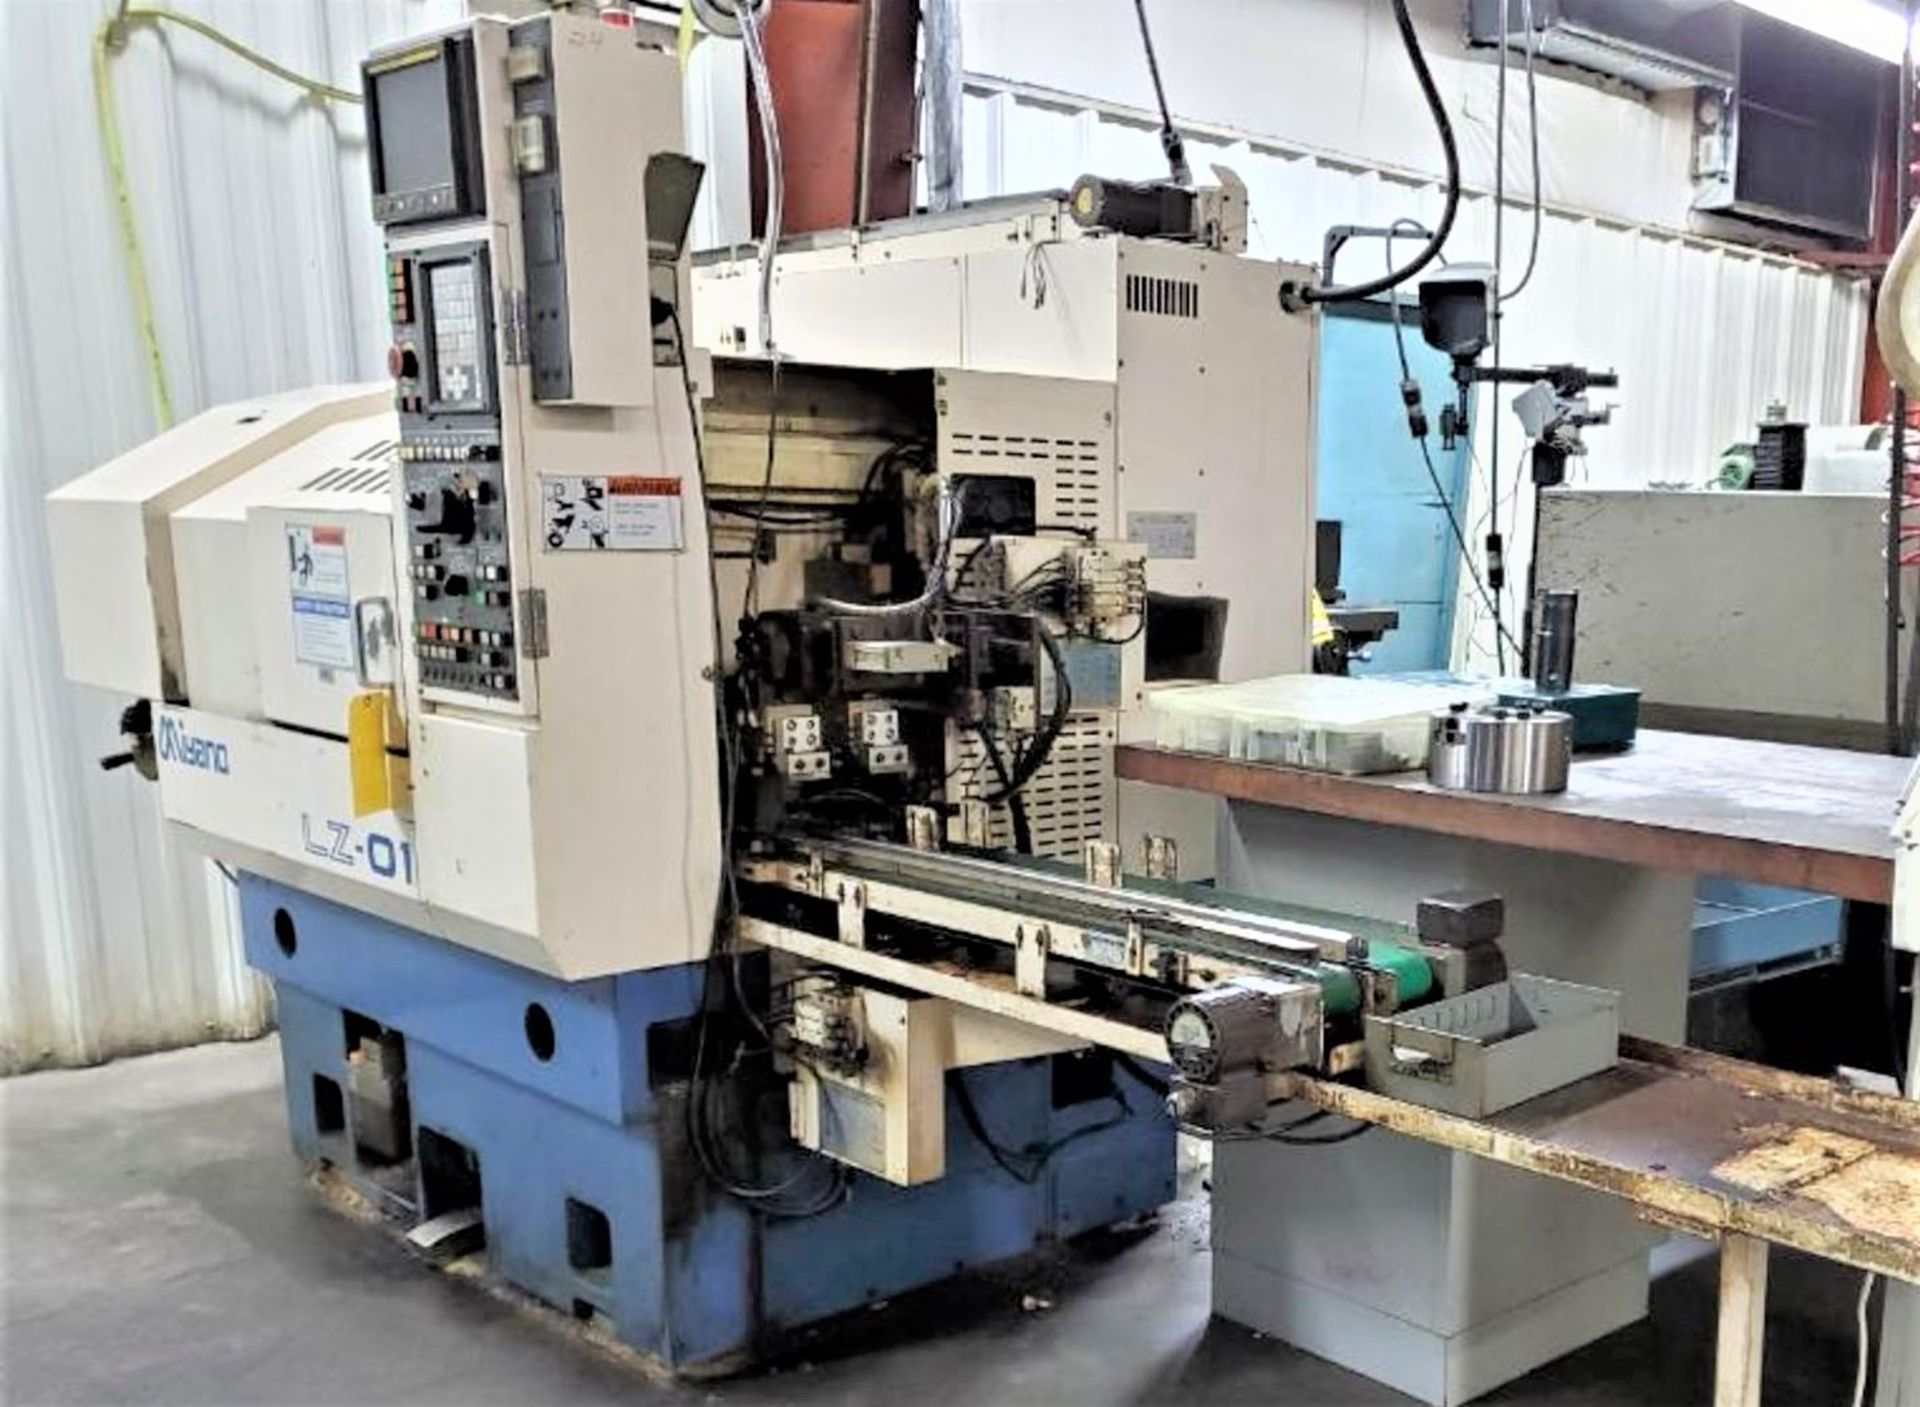 Miyano Model LZ-01 2-Axis Turning Center w/Auto Load/Unload System, S/N LZ010223, New 2001 - Image 3 of 13